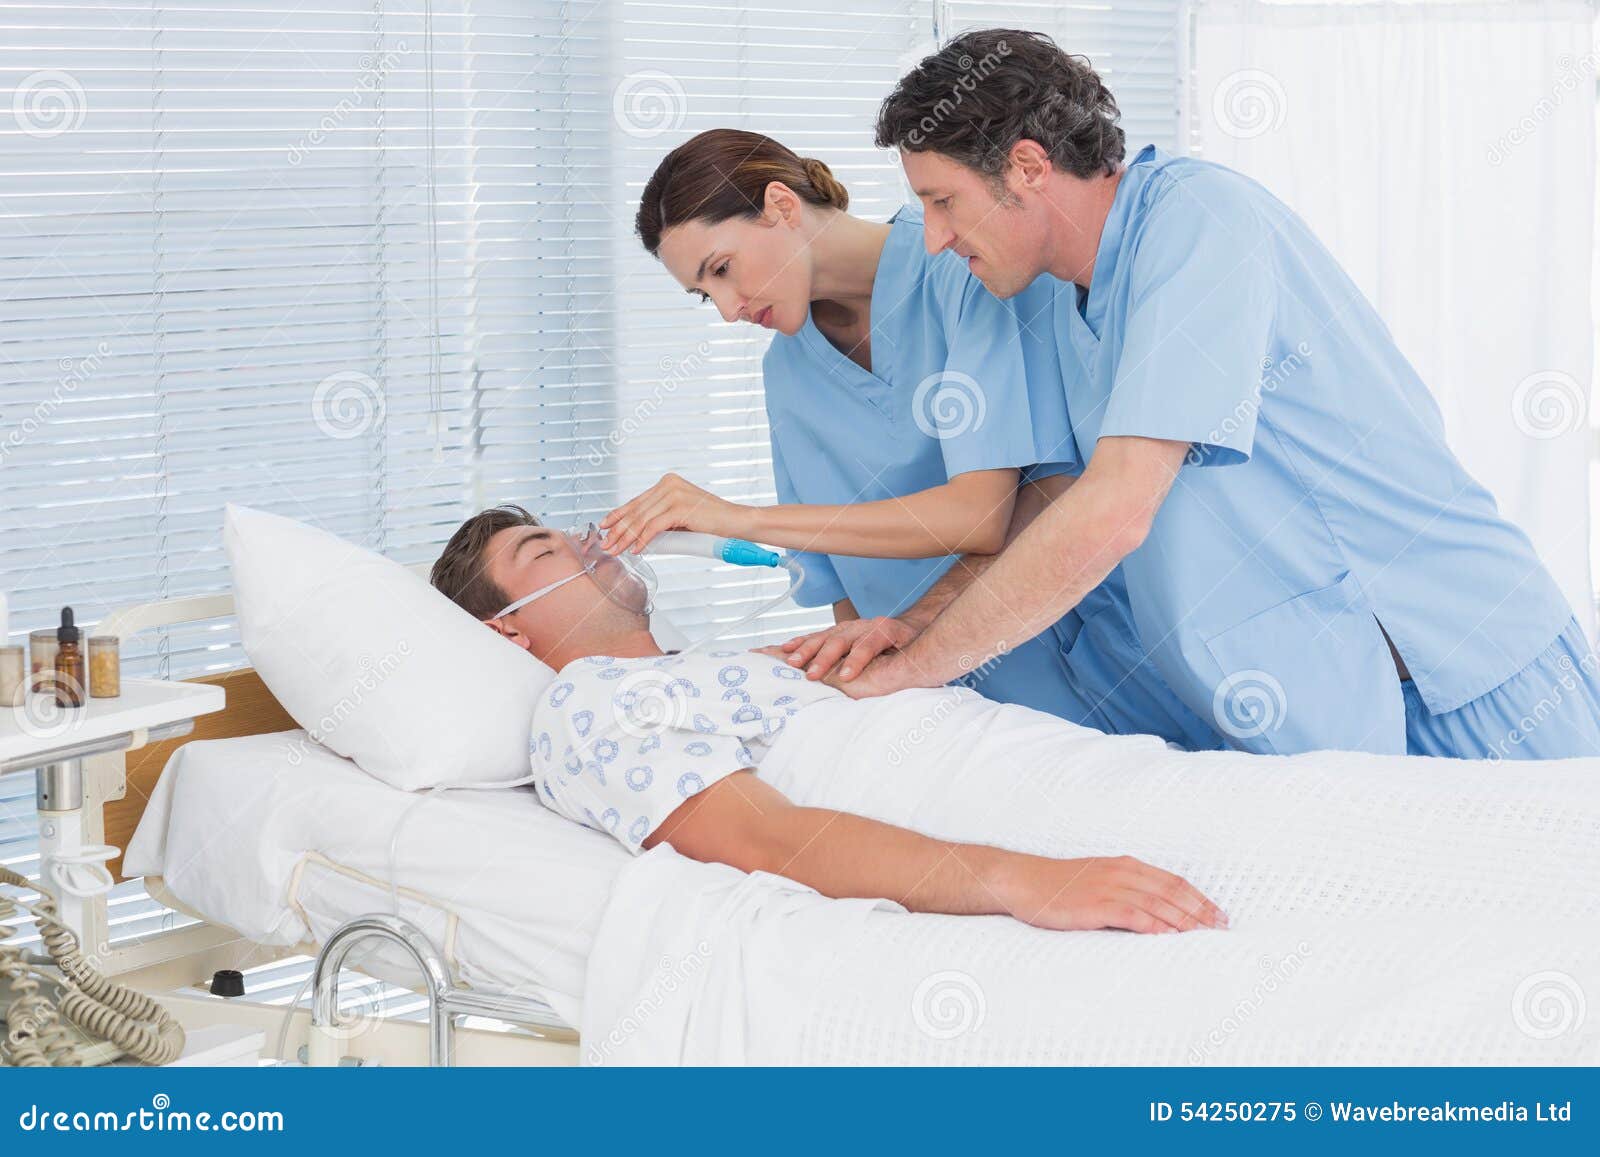 Worried Doctors Doing Heart Massage And Holding Oxygen Mask Stock Image